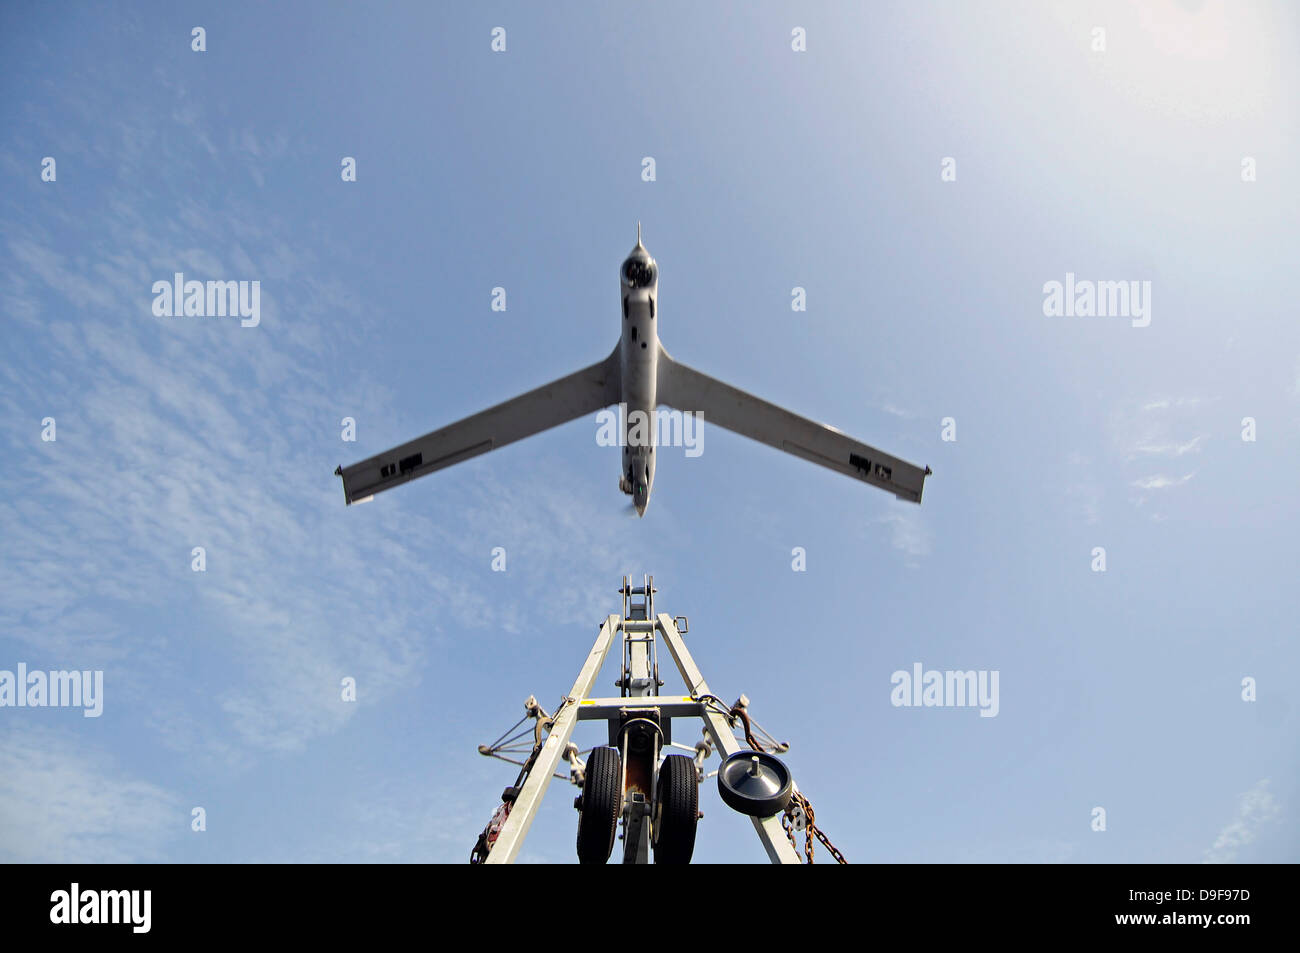 A ScanEagle unmanned aerial vehicle launches from its catapult. Stock Photo